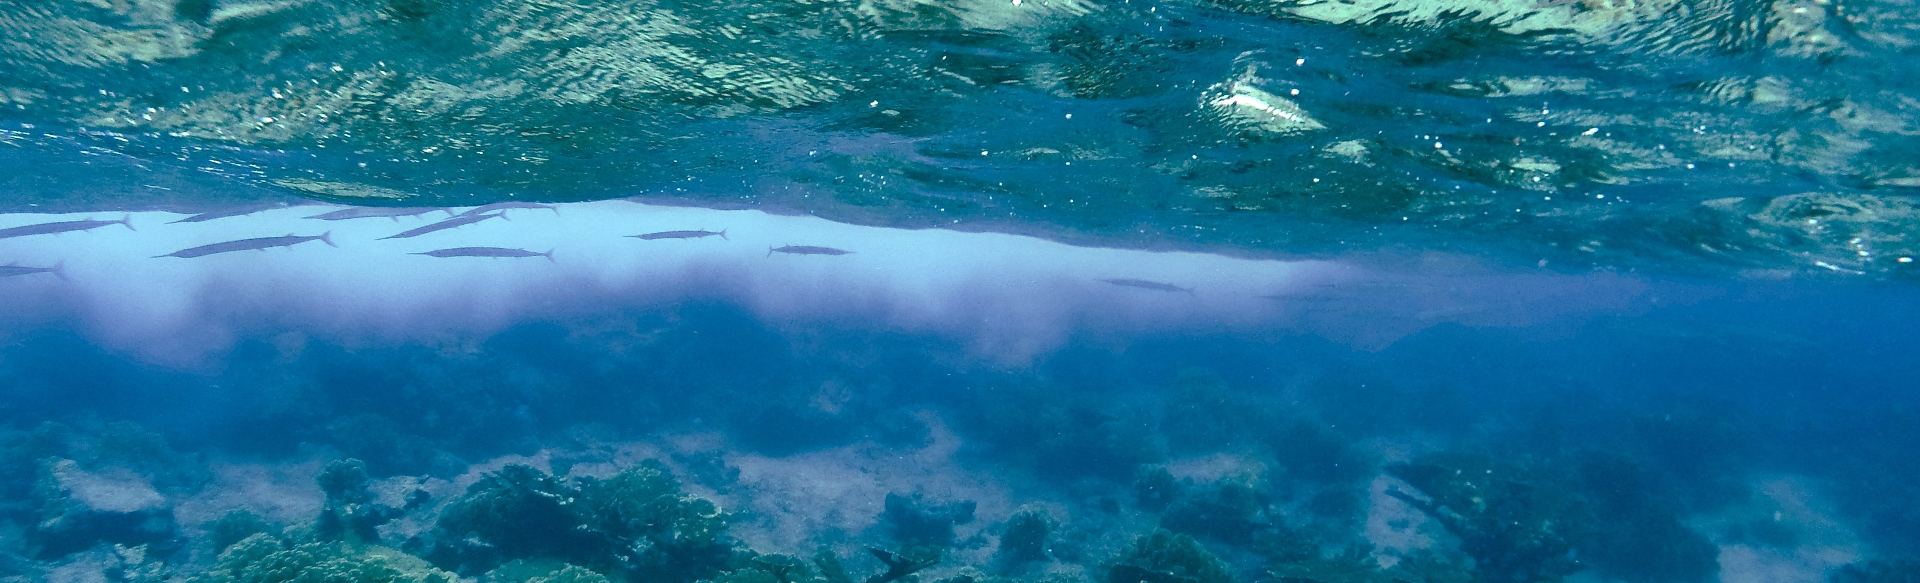 Redfin needlefish hiding under the sea surface near Curacao. Picture by Juliette Jacquemont, co-author of the paper.